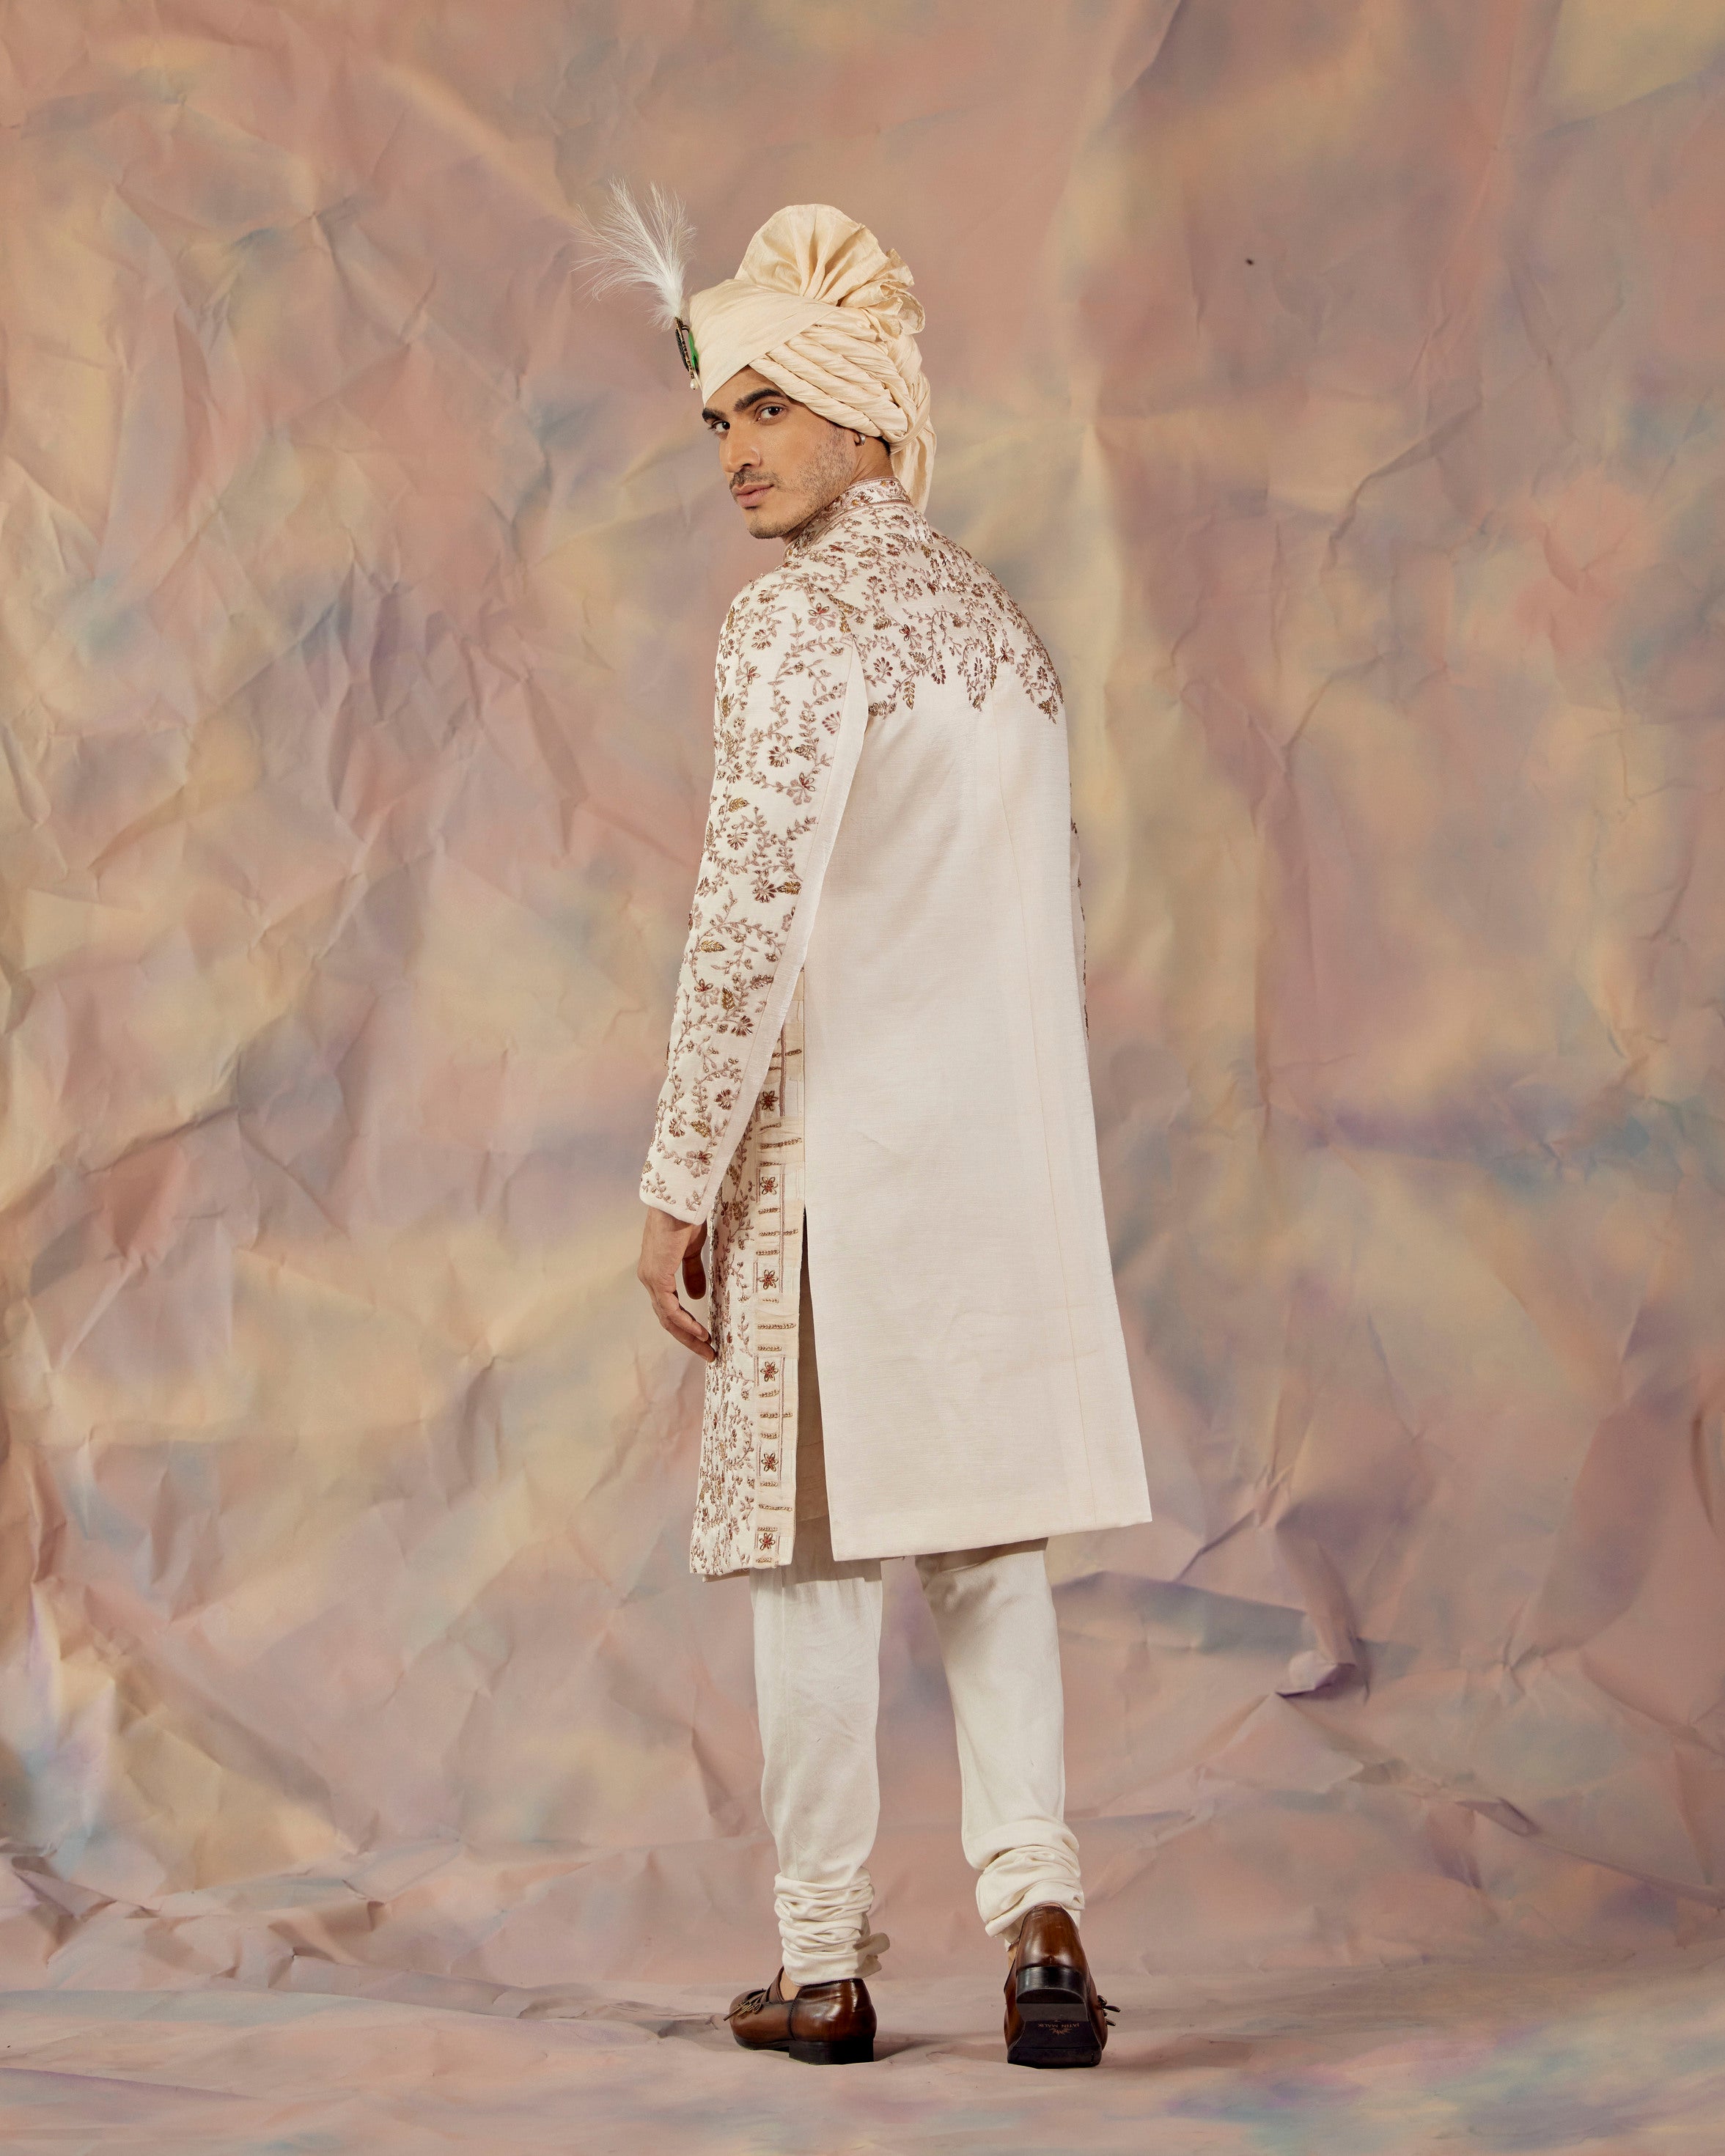 Regal Rendezvous Sherwani Set: Make a statement with impeccable style and grace